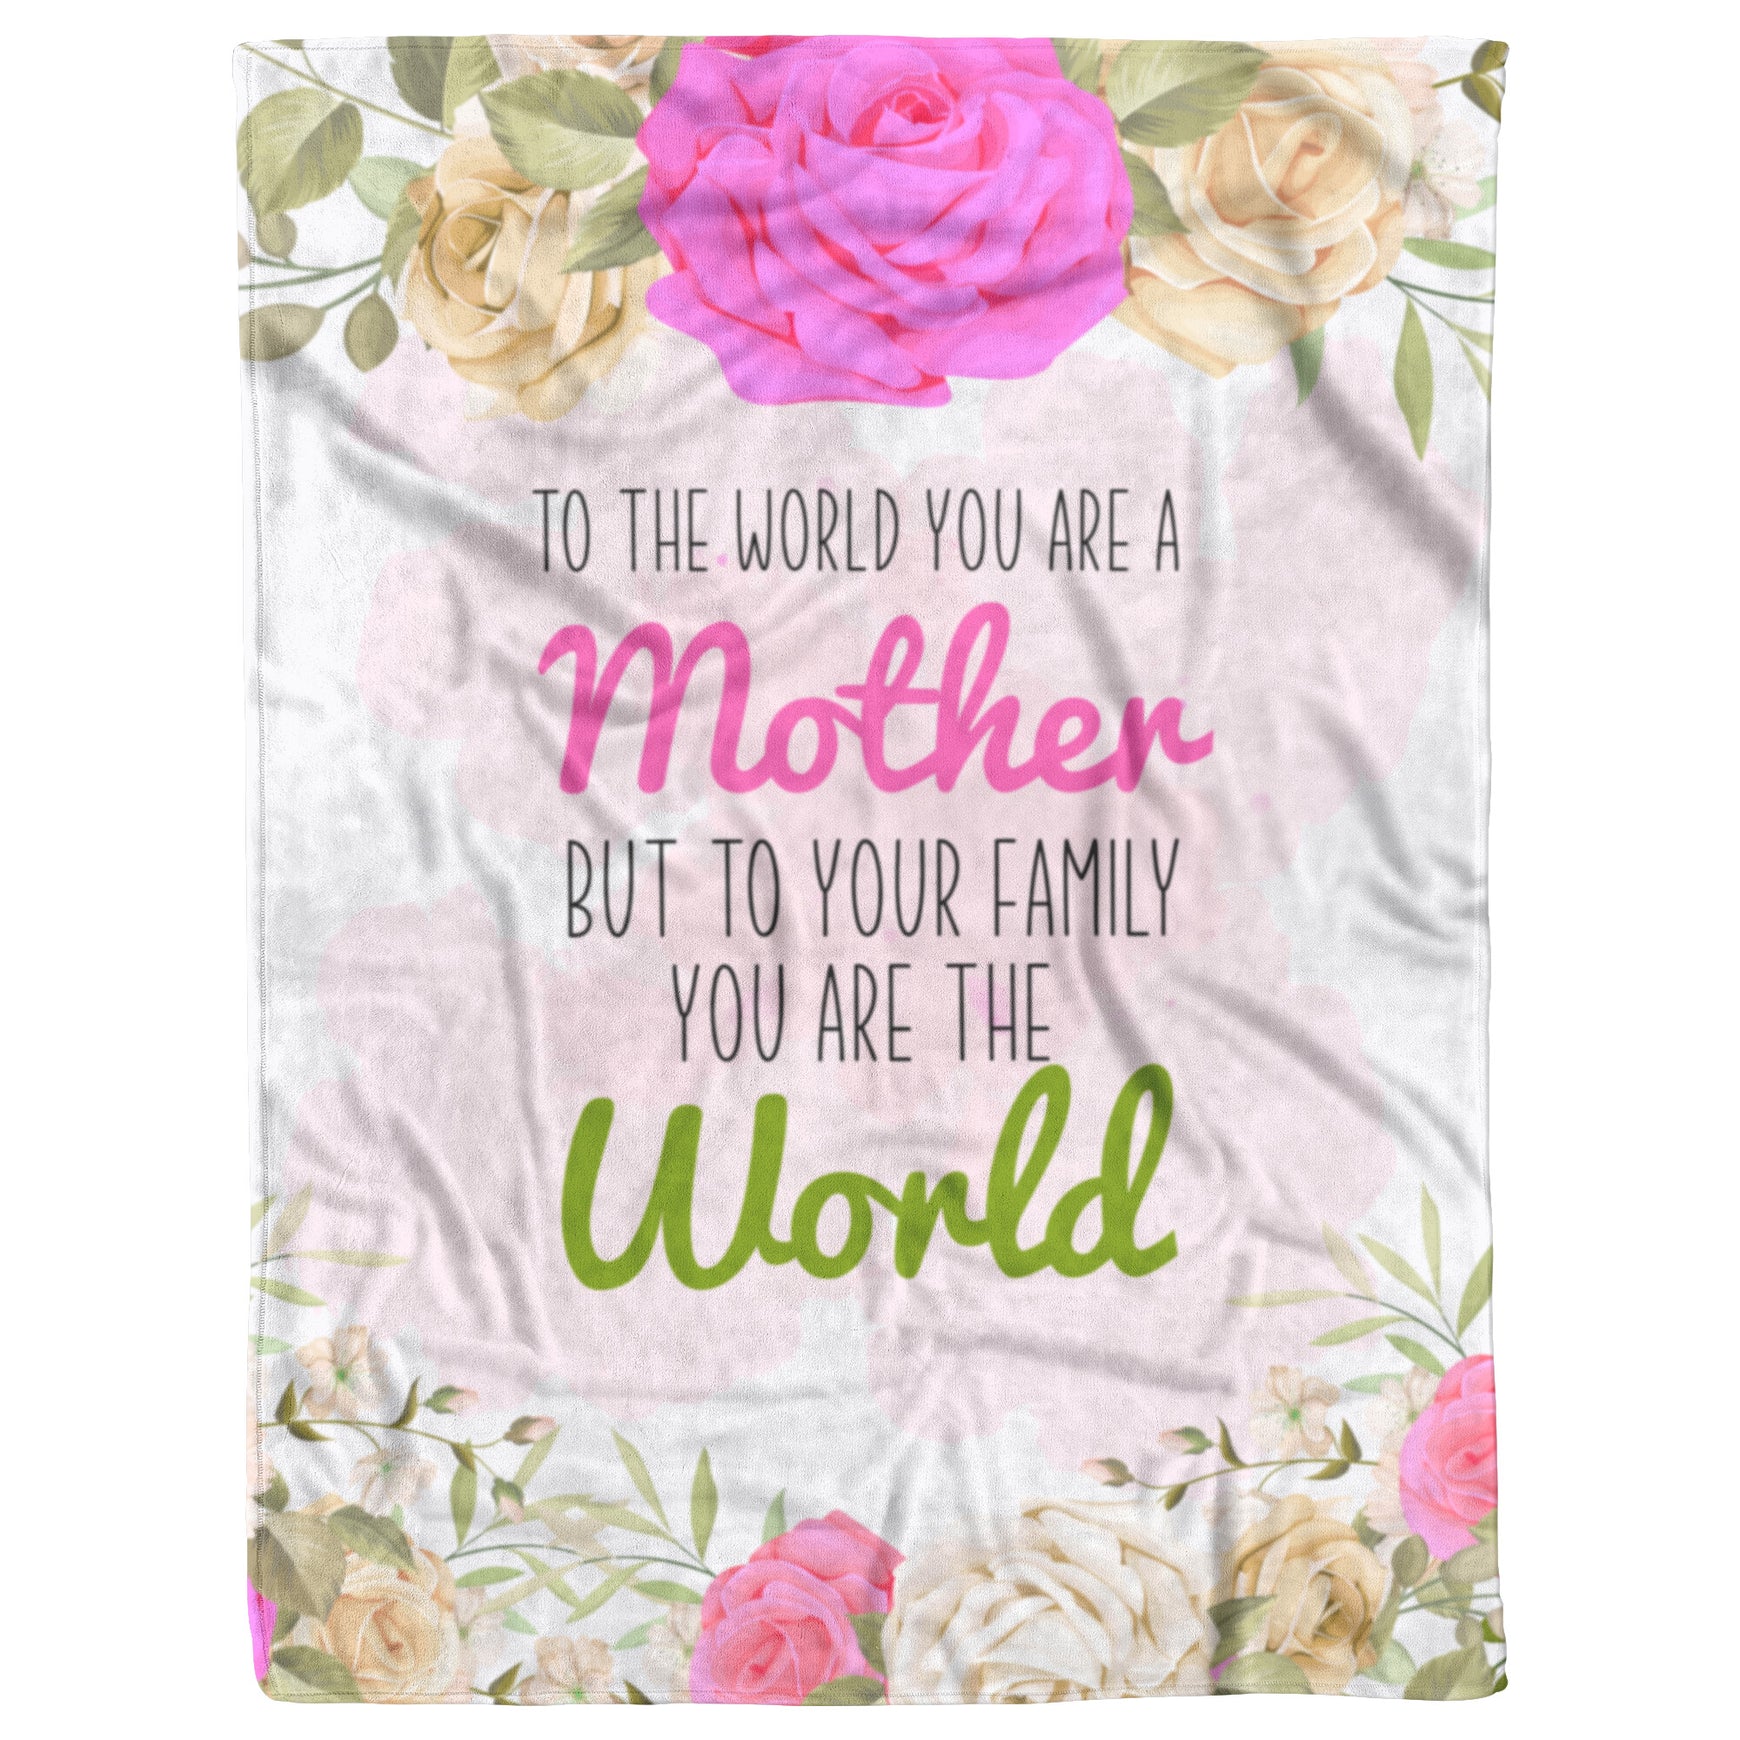 To Your Family You Are The World Mother's Day Fleece Blanket